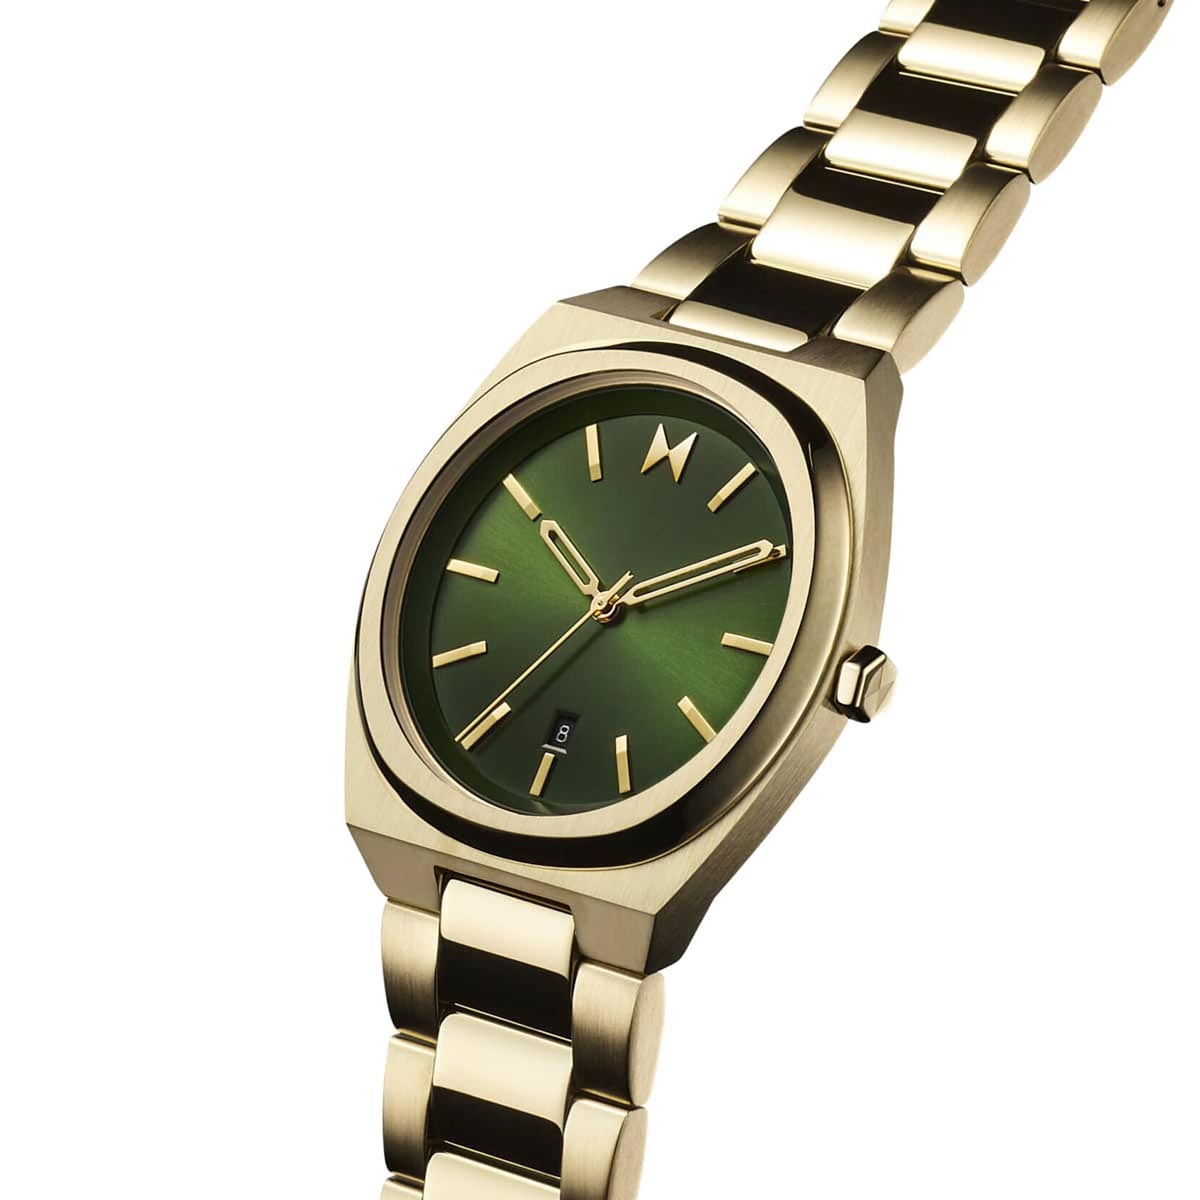 MVMT by Movado Odyssey II Mens Watch with Green Dial and Yellow Ion Plated Steel Bracelet (quartz movement)